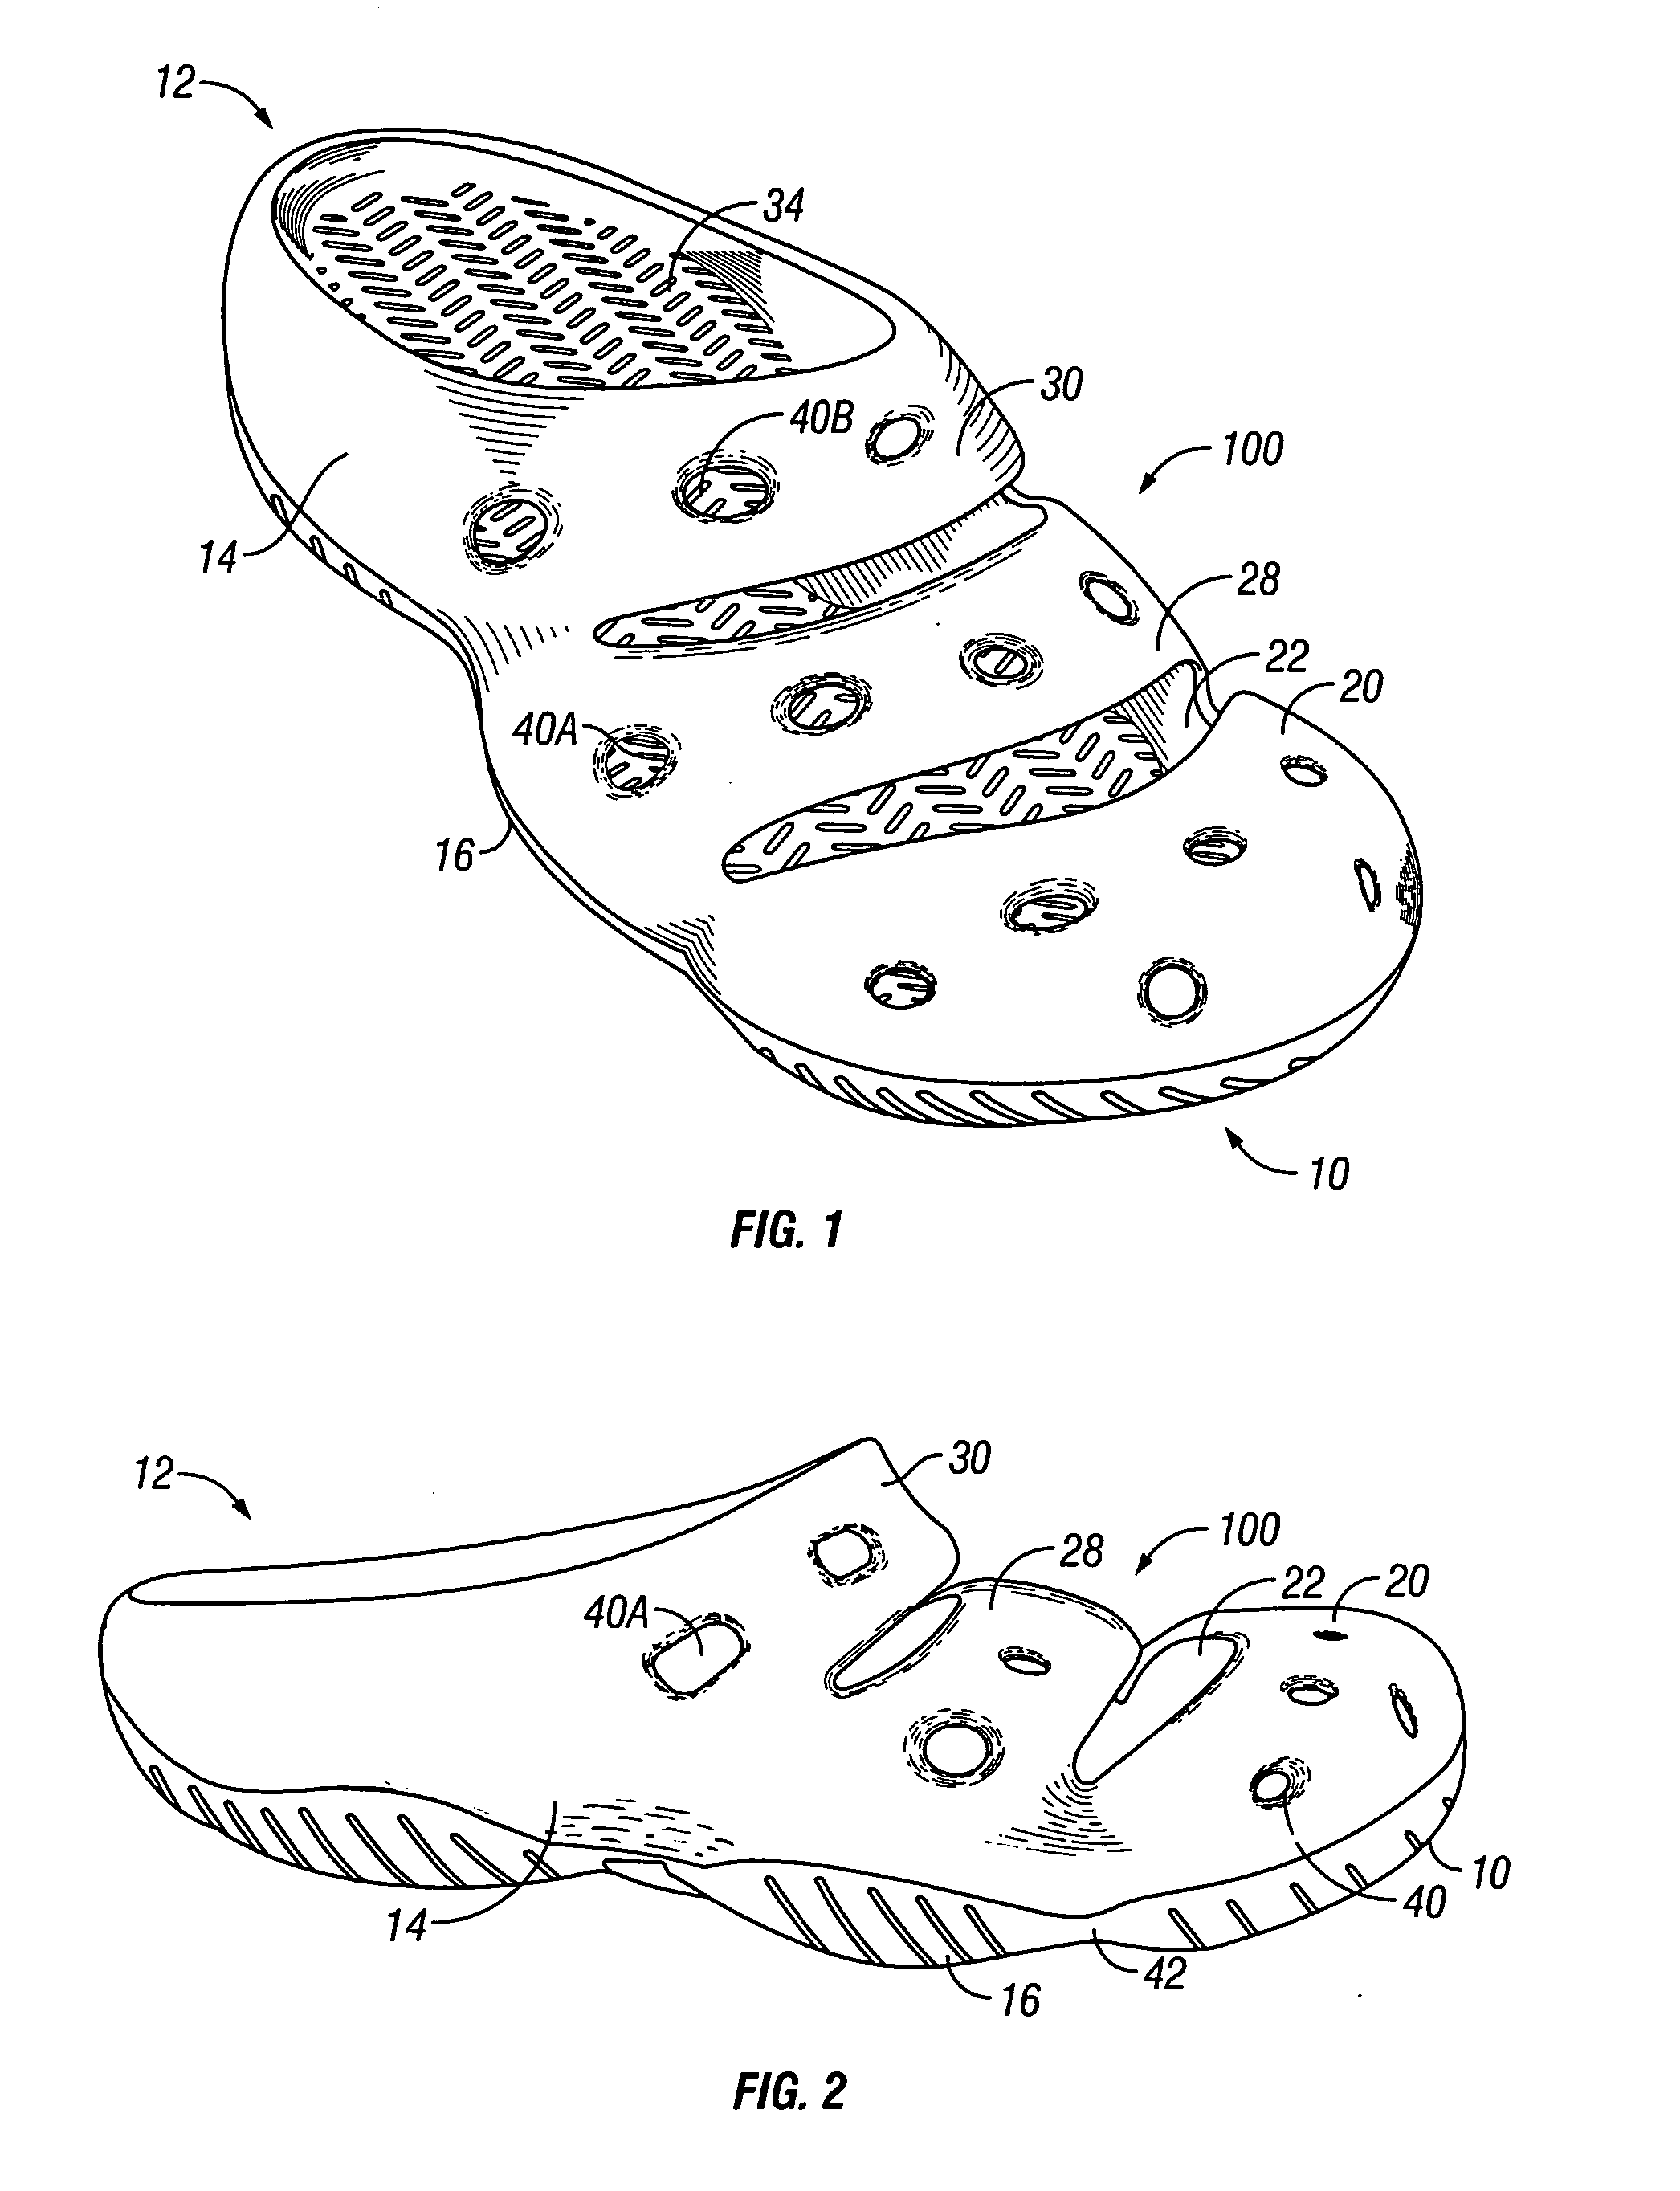 Footwear having an enclosed and articulated toe